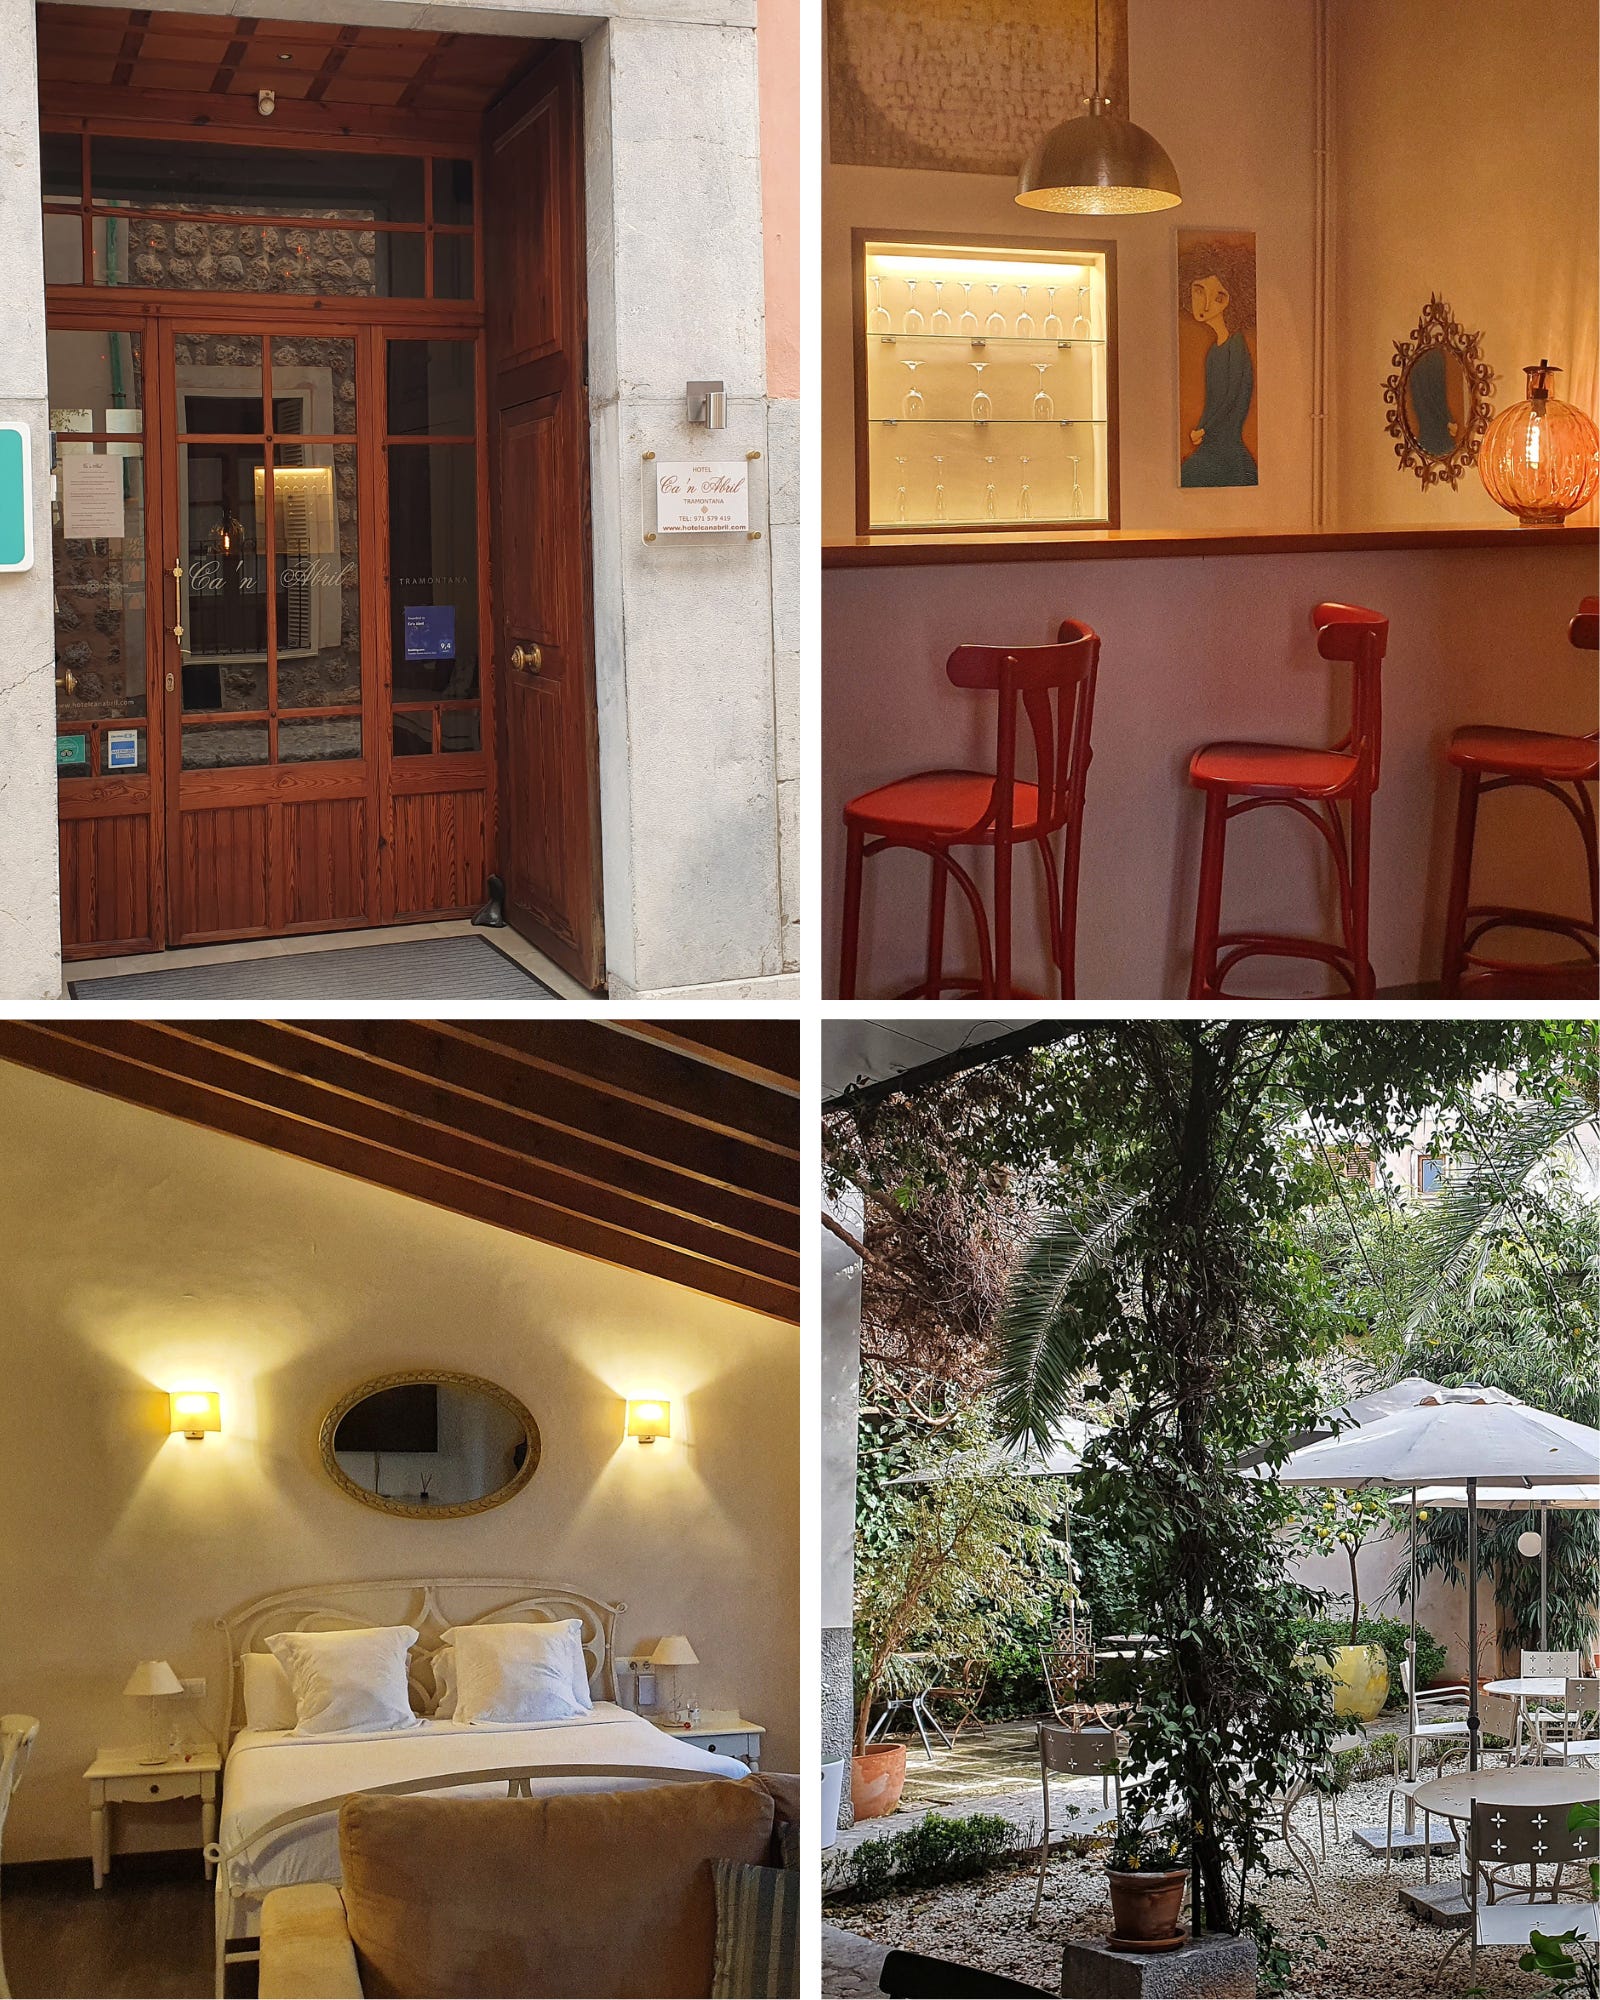 Four views of the Ca'n Abril Hotel in Soller